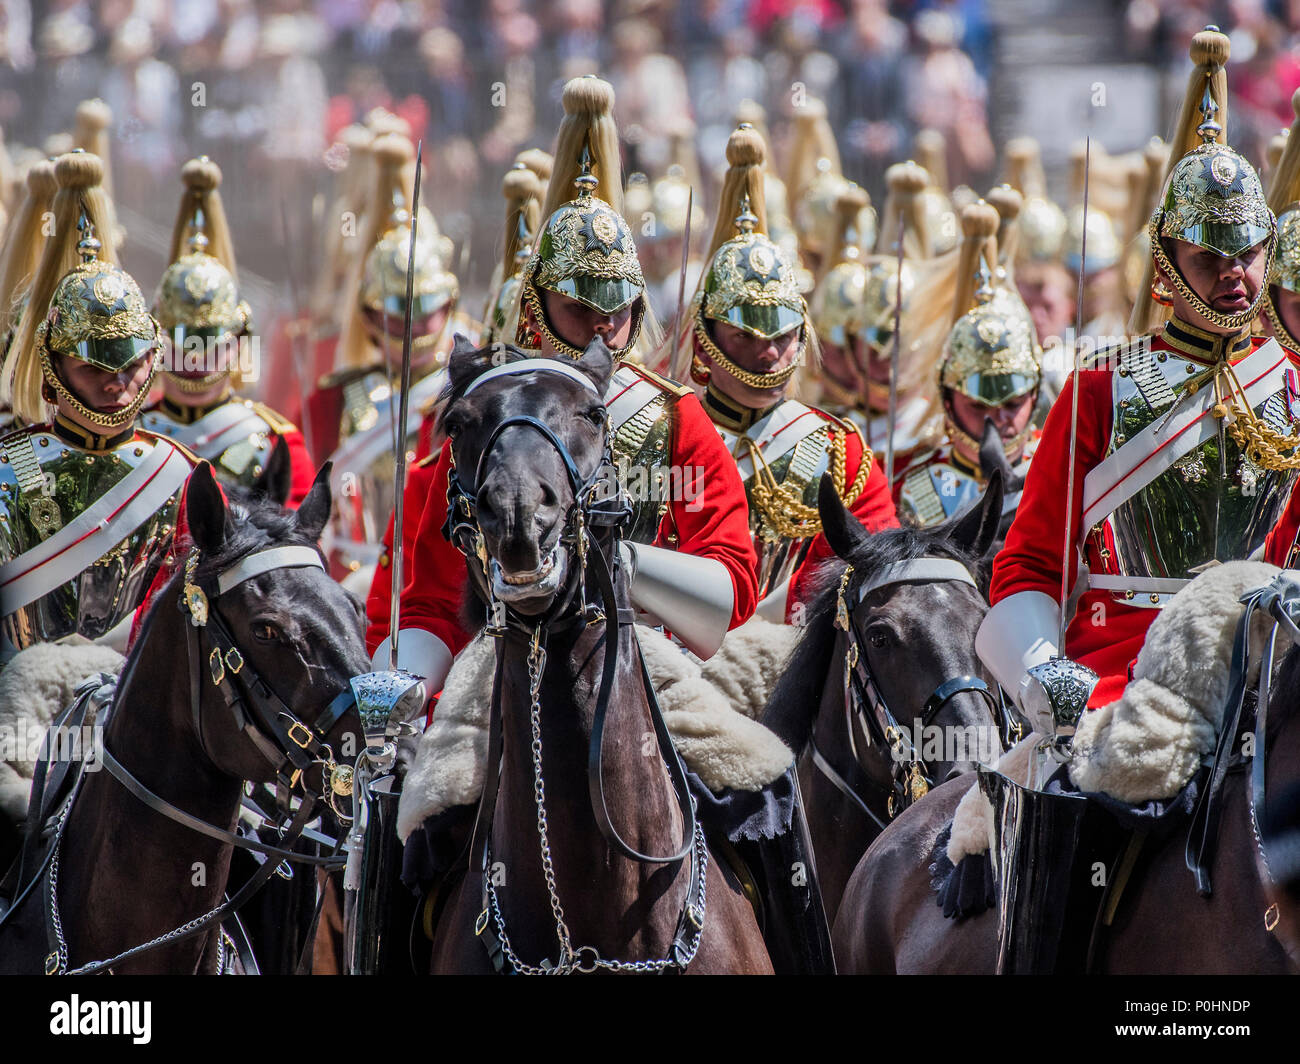 London, UK, 9 June 2018. The Queen’s Birthday Parade, more popularly known as Trooping the Colour. The Coldstream Guards Troop Their Colour., Credit: Guy Bell/Alamy Live News Stock Photo